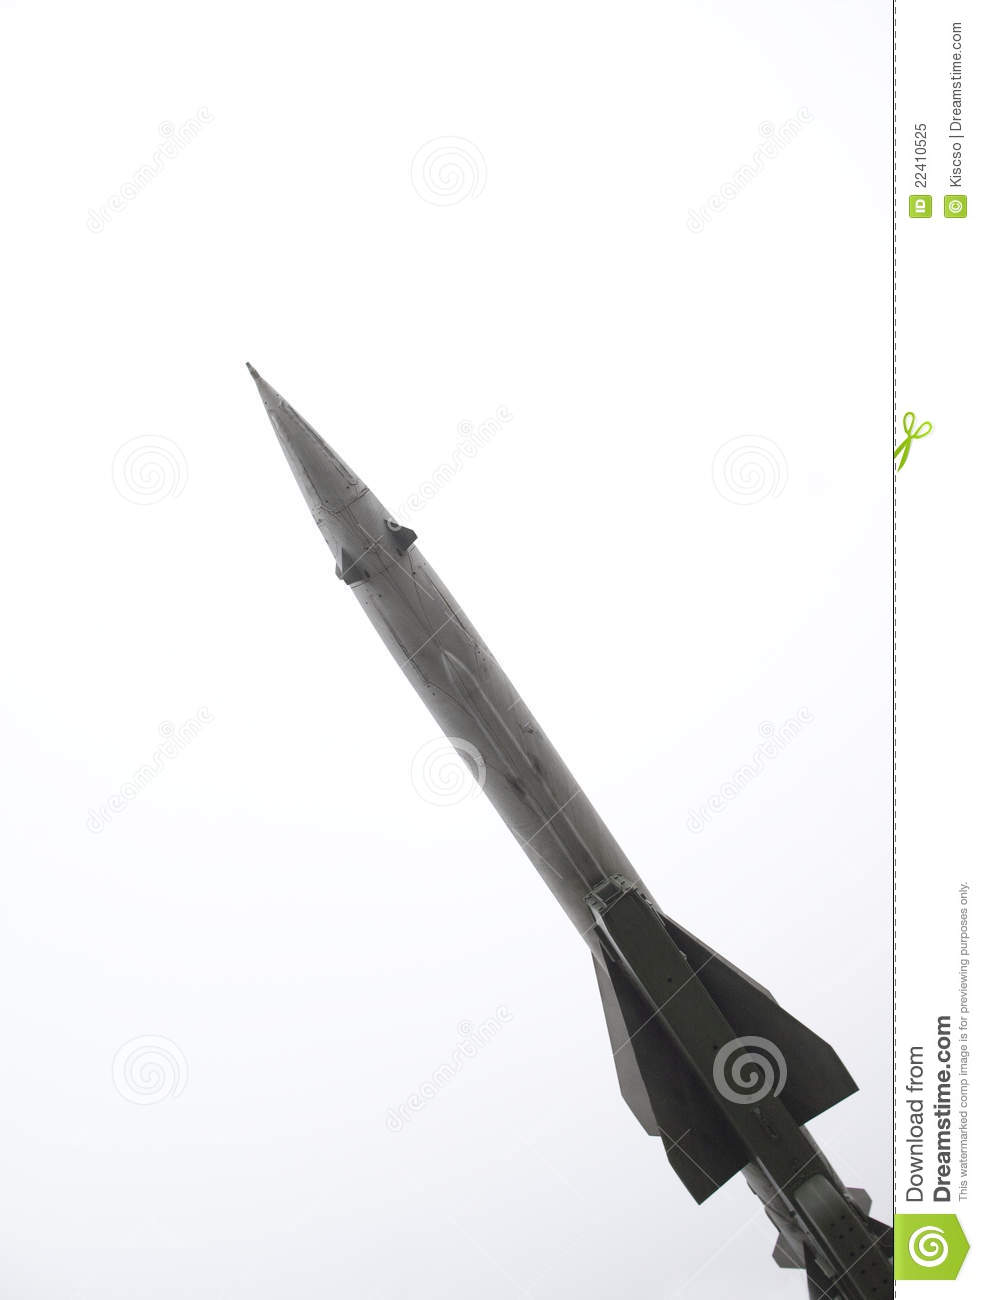 Nuclear Missile Royalty Free Stock Photo   Image  22410525